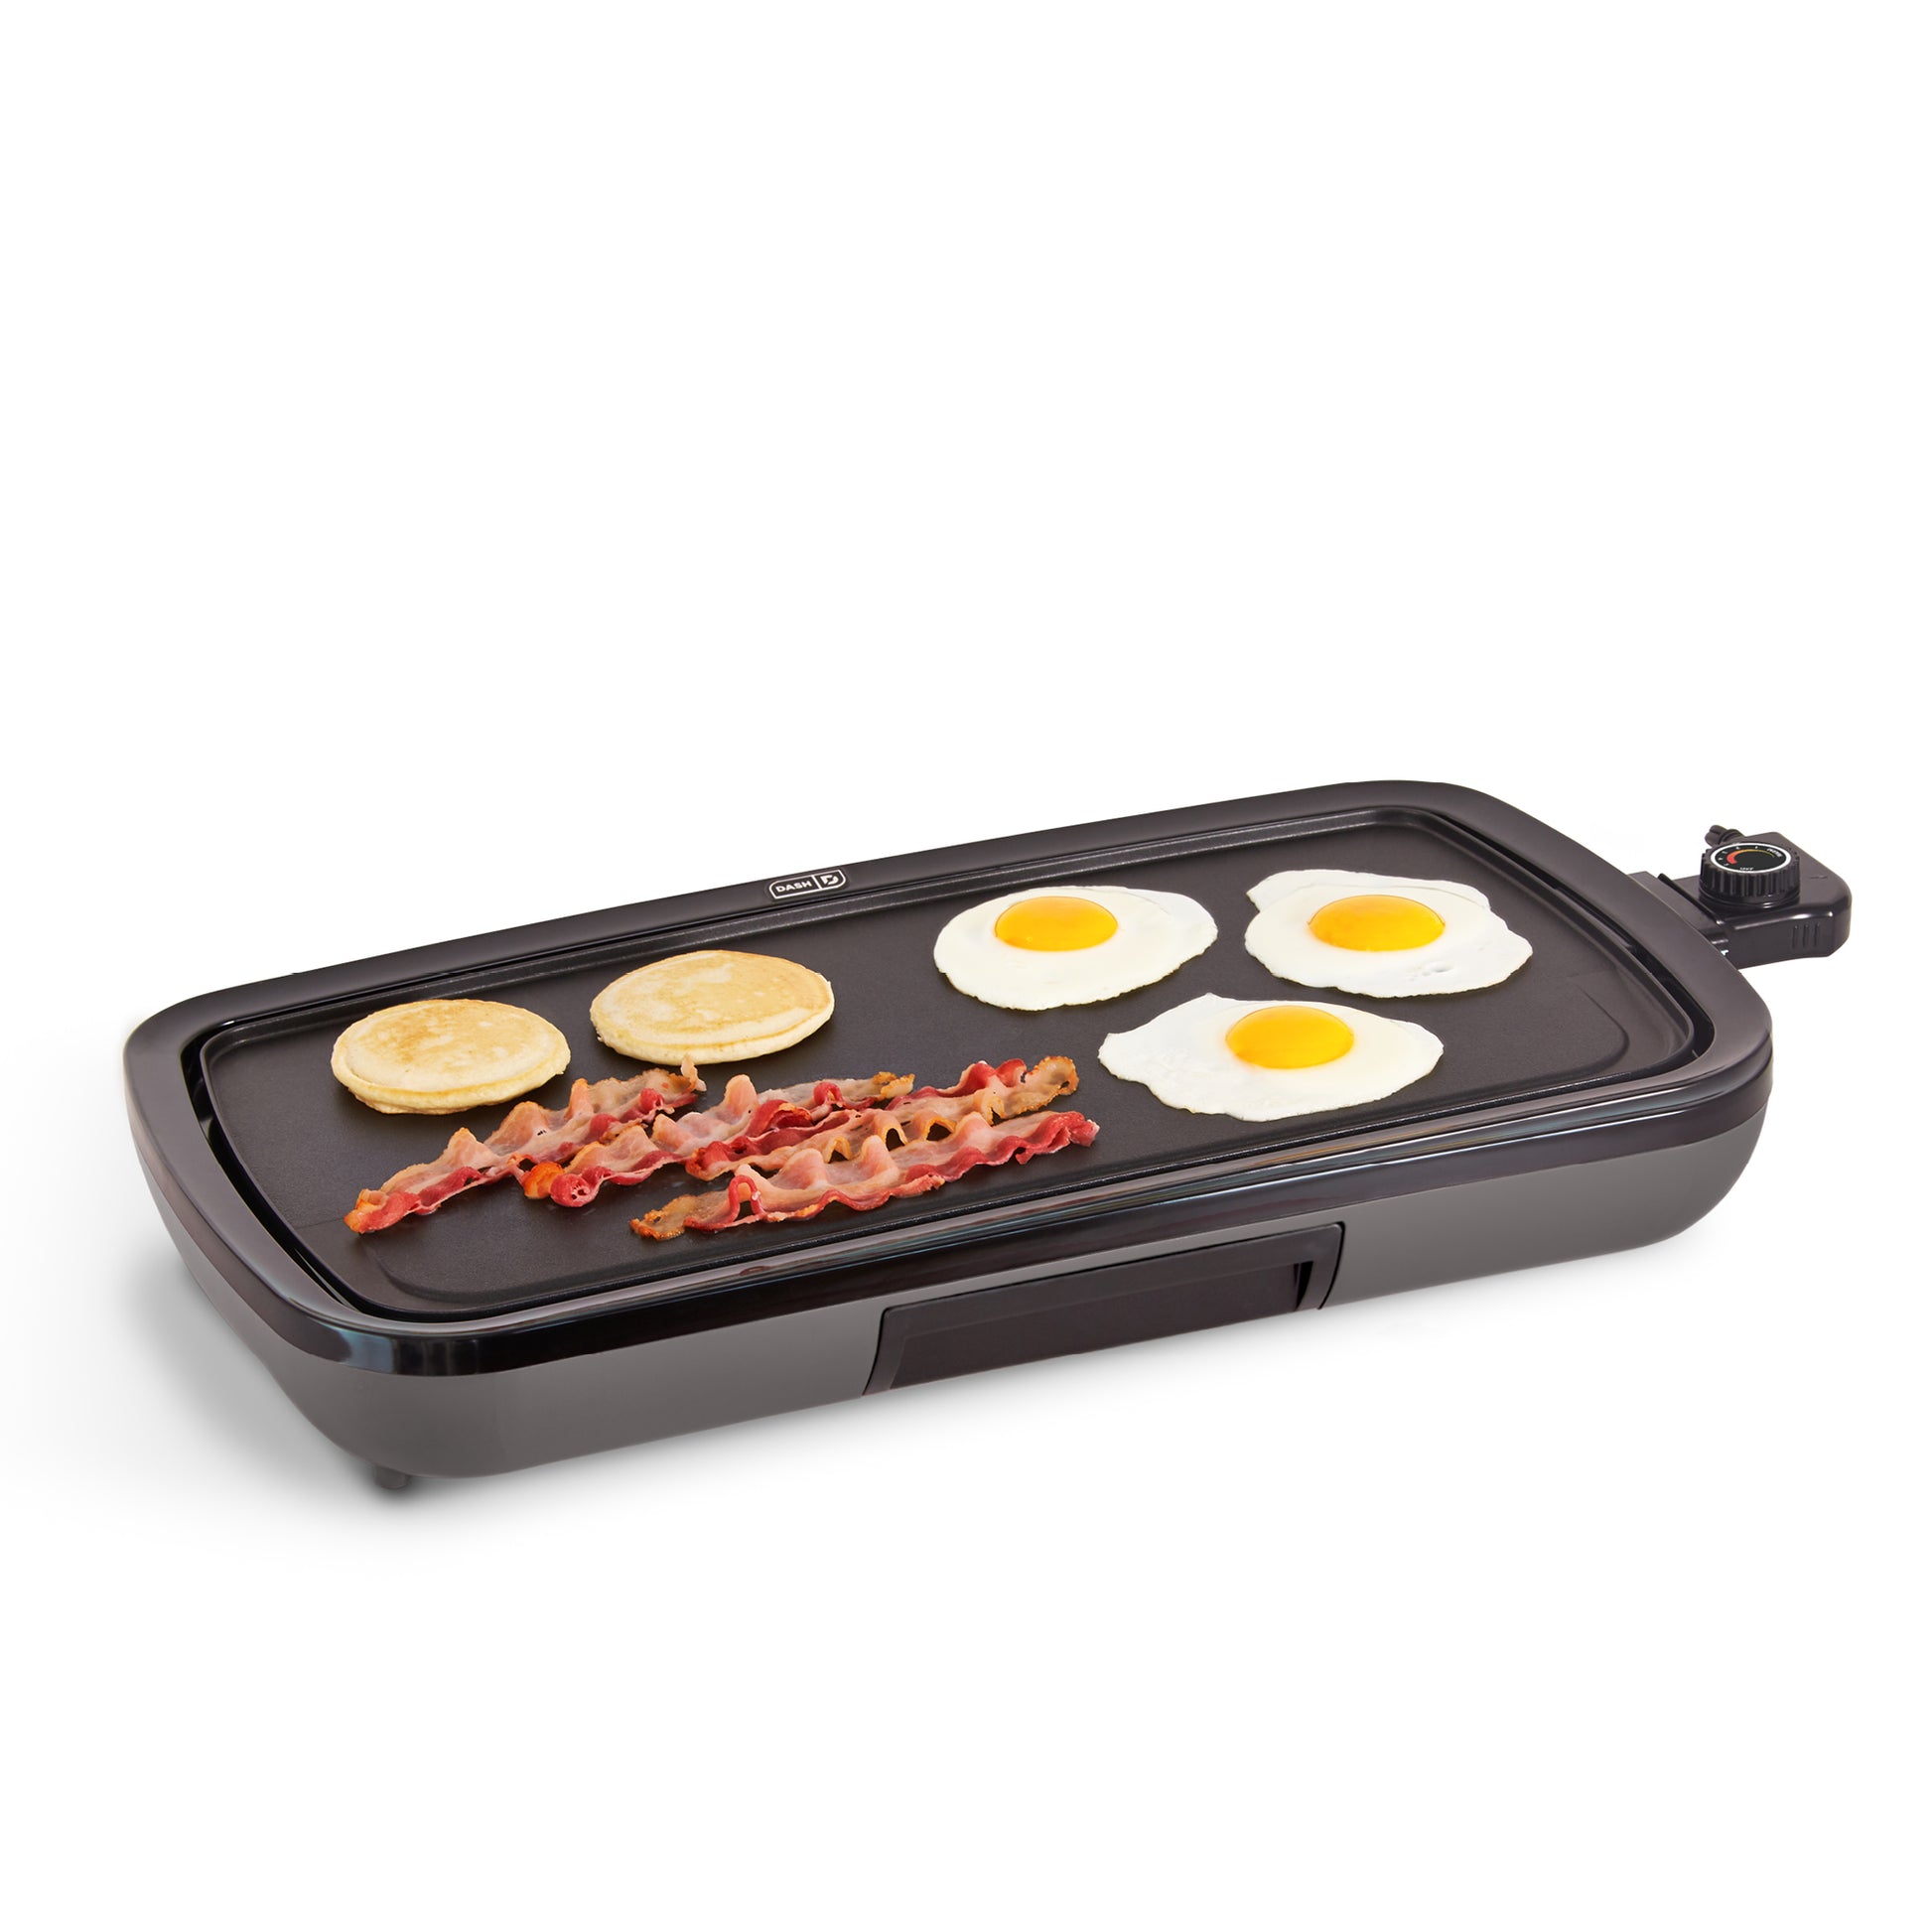 Dash Deluxe Everyday Electric Griddle with Dishwasher Safe Removable Nonstick Cooking Plate for Pancakes, Burgers, Eggs and More, Includes Drip Tray